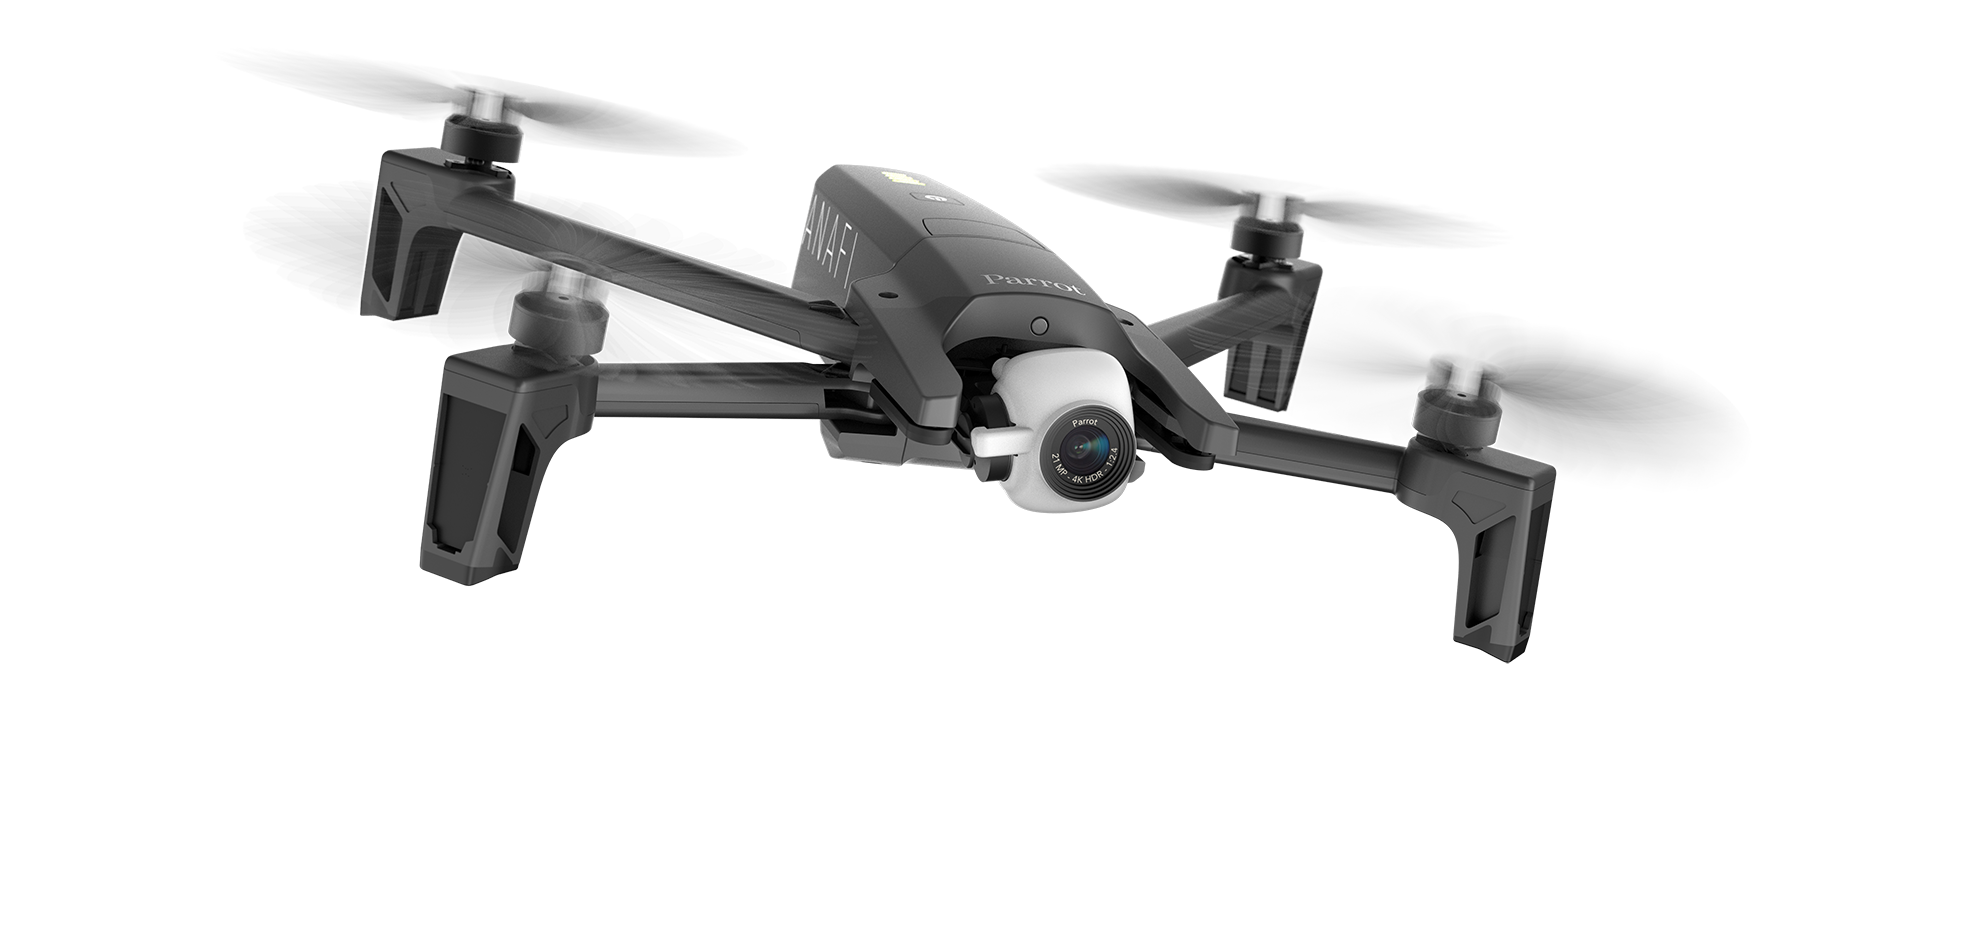 This Parrot drone is on sale for the cheapest we've ever seen it